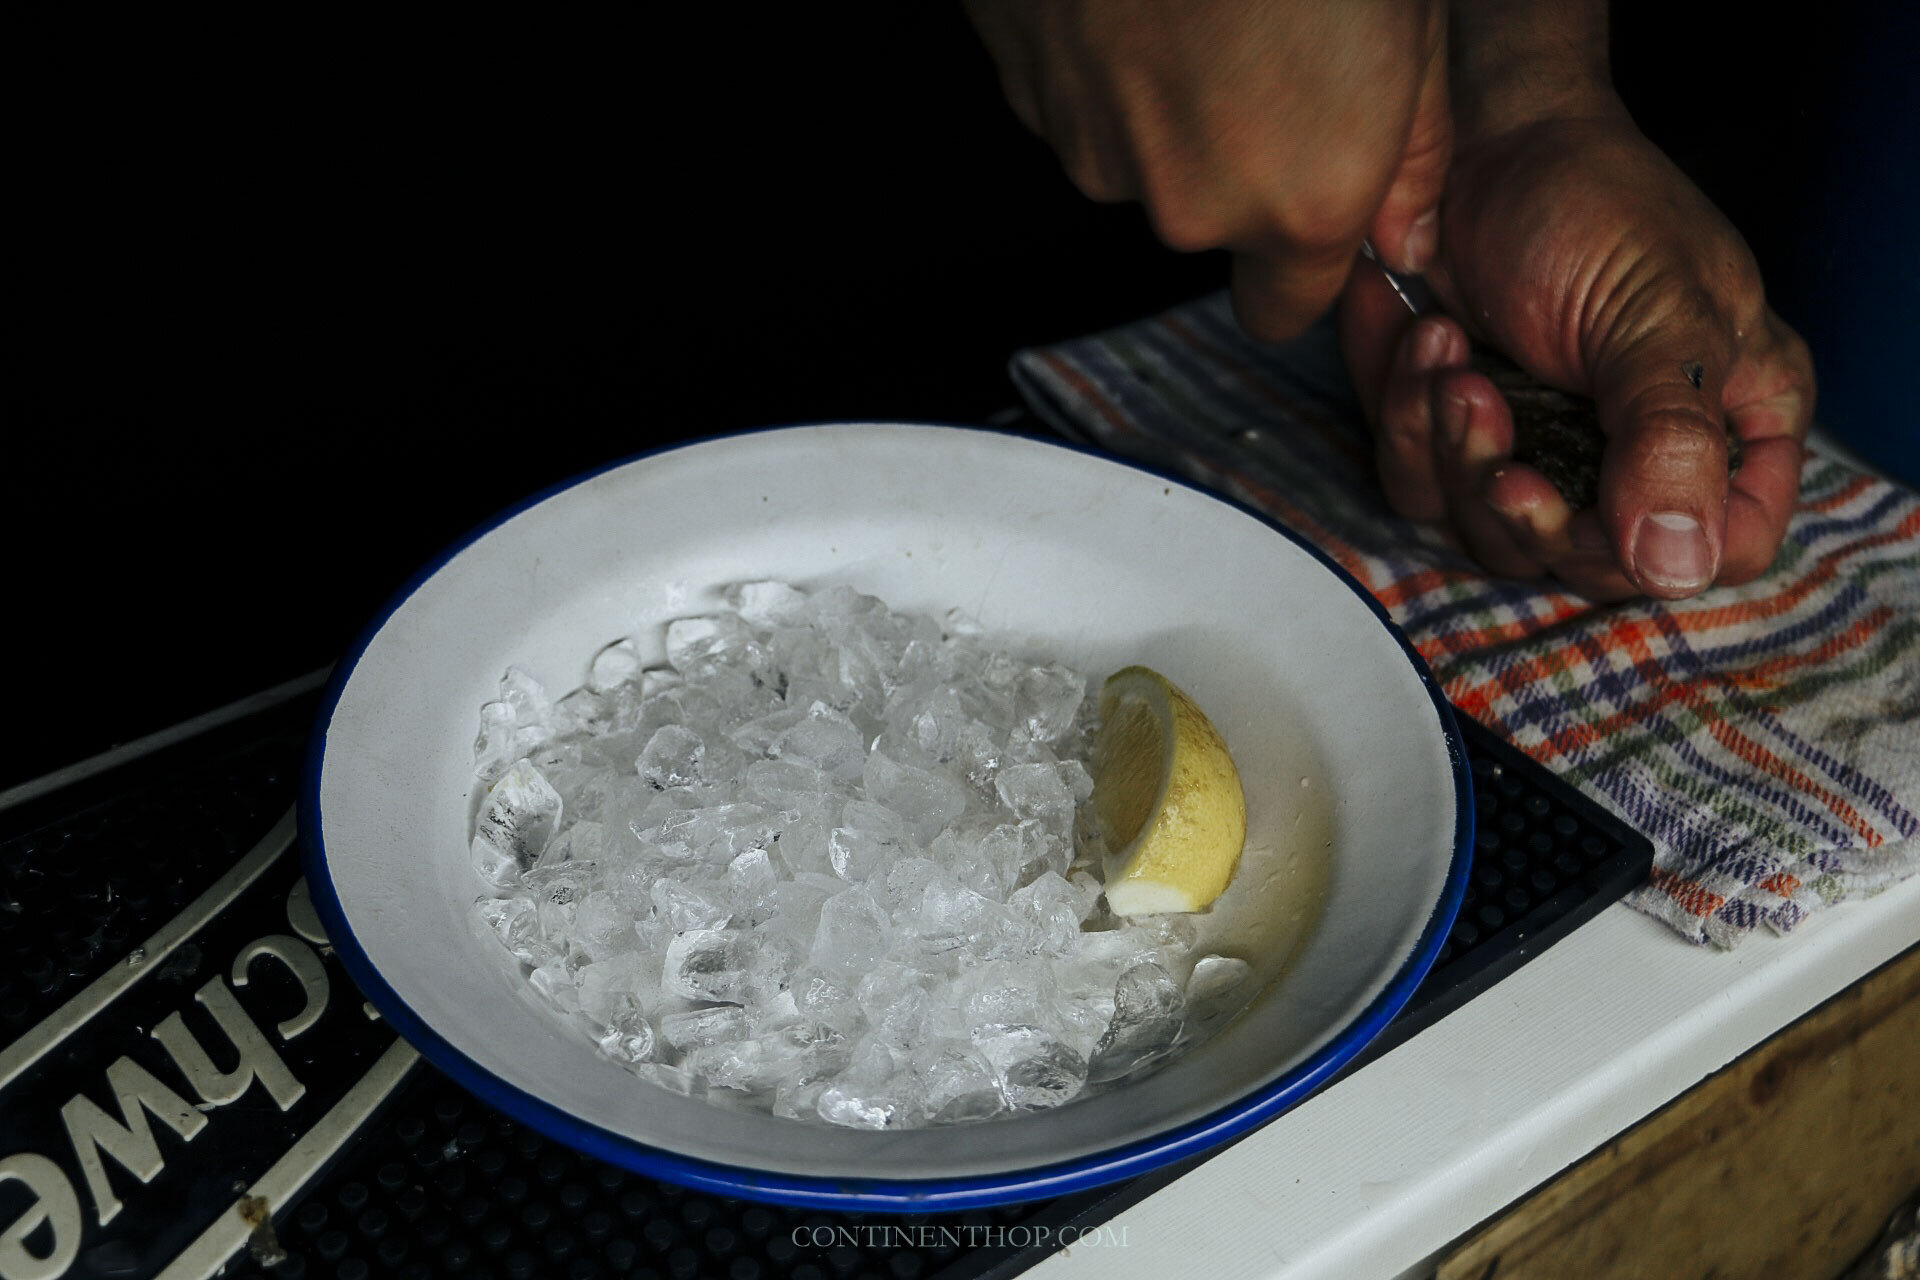 person shucking oysters for tapas in santander spain next to a bowl of ice with lemon slice